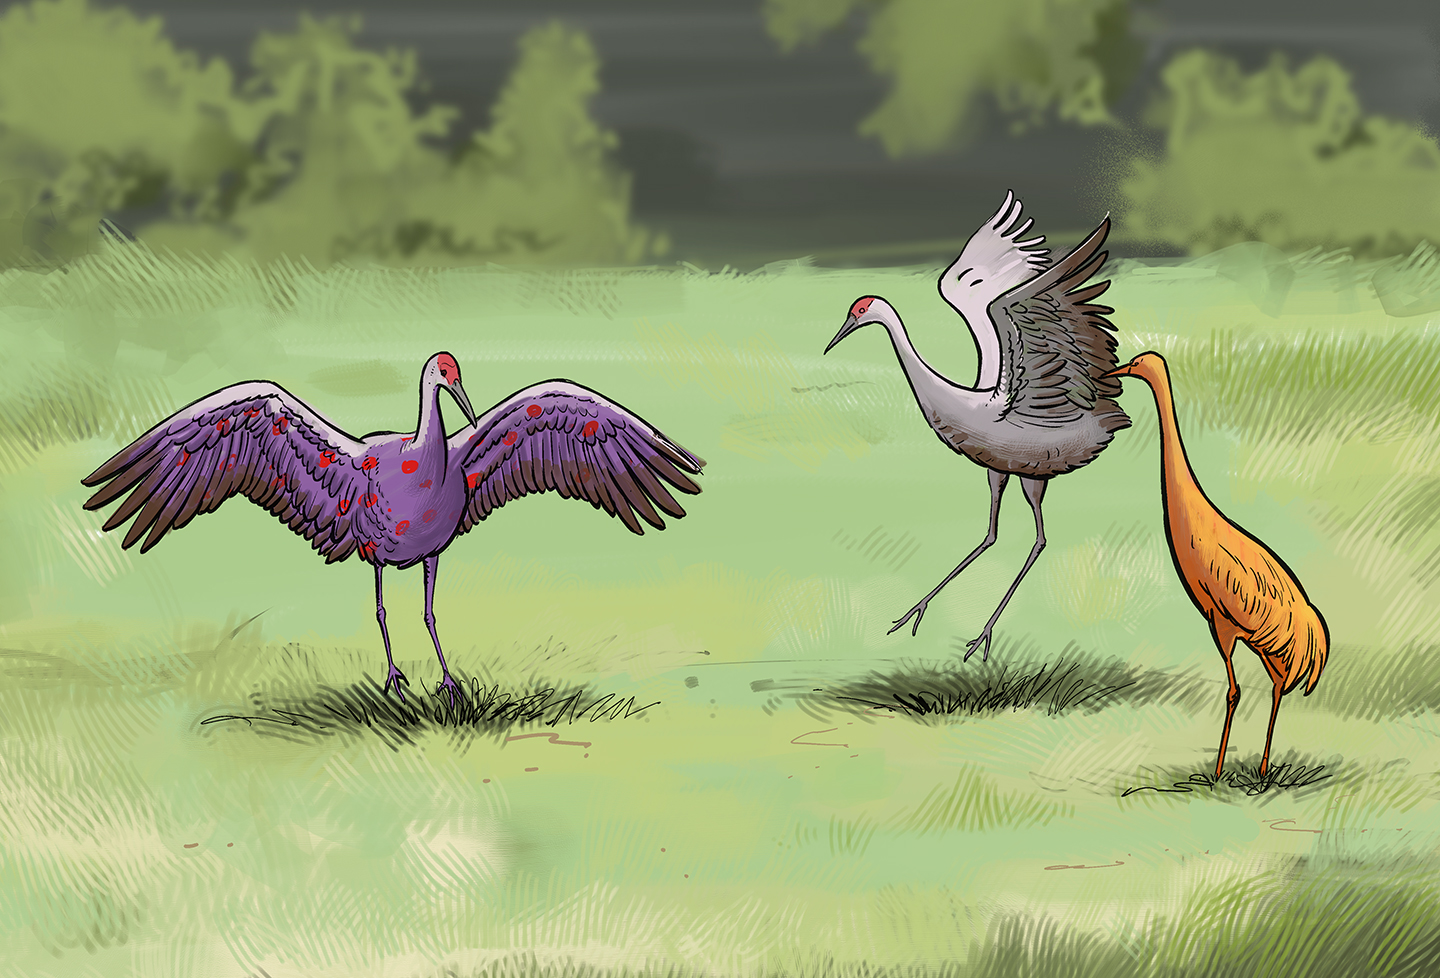 Three common cranes in a field, each a different color.